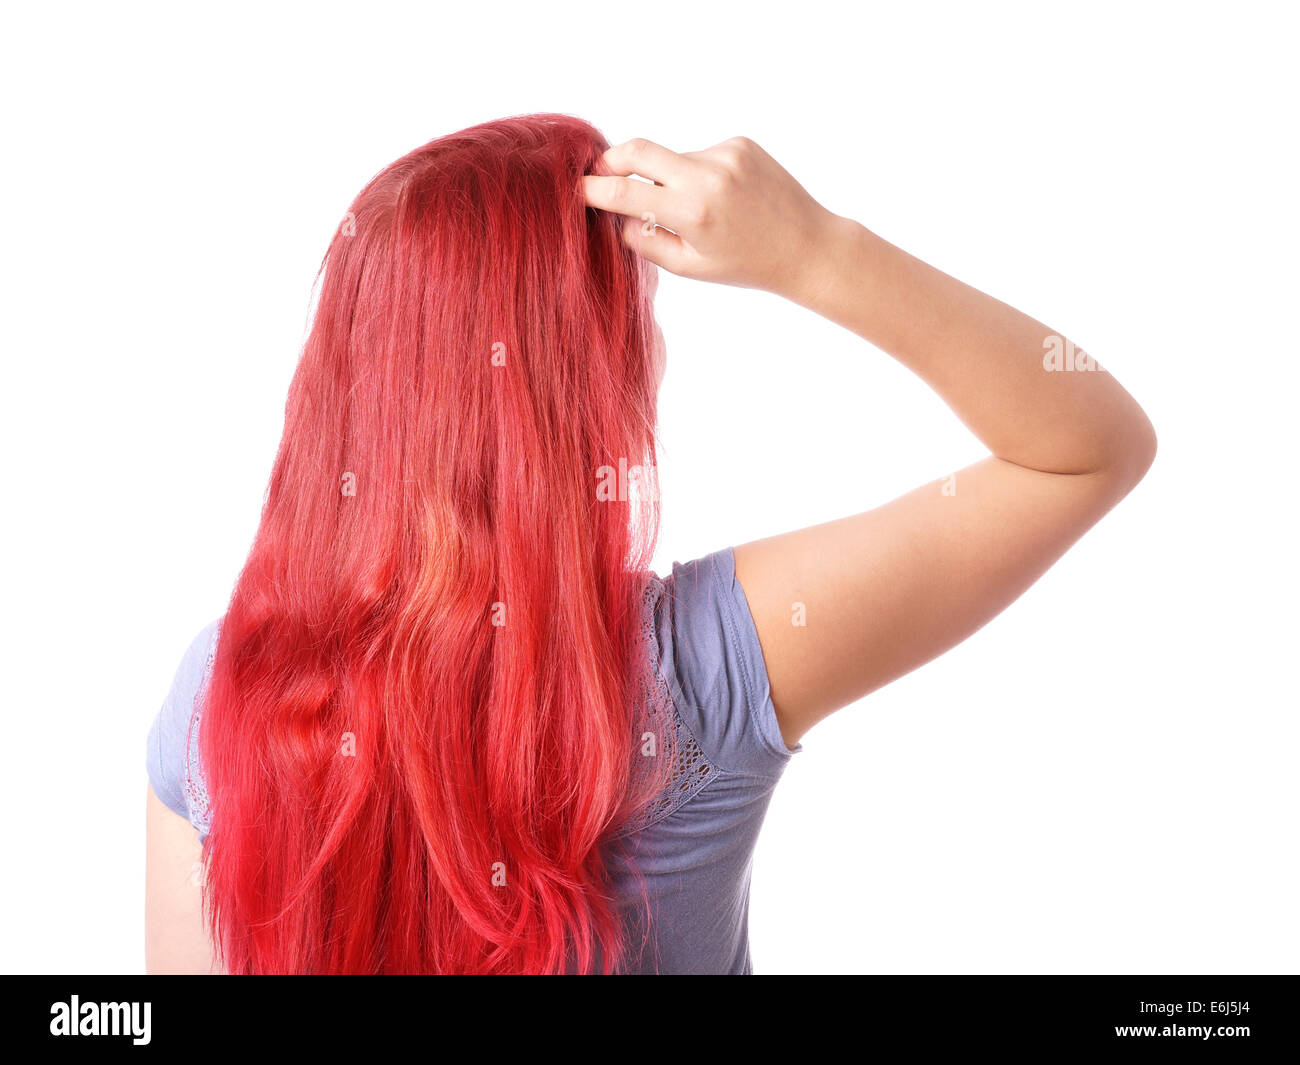 rear view of a woman thinking and scratching her head Stock Photo